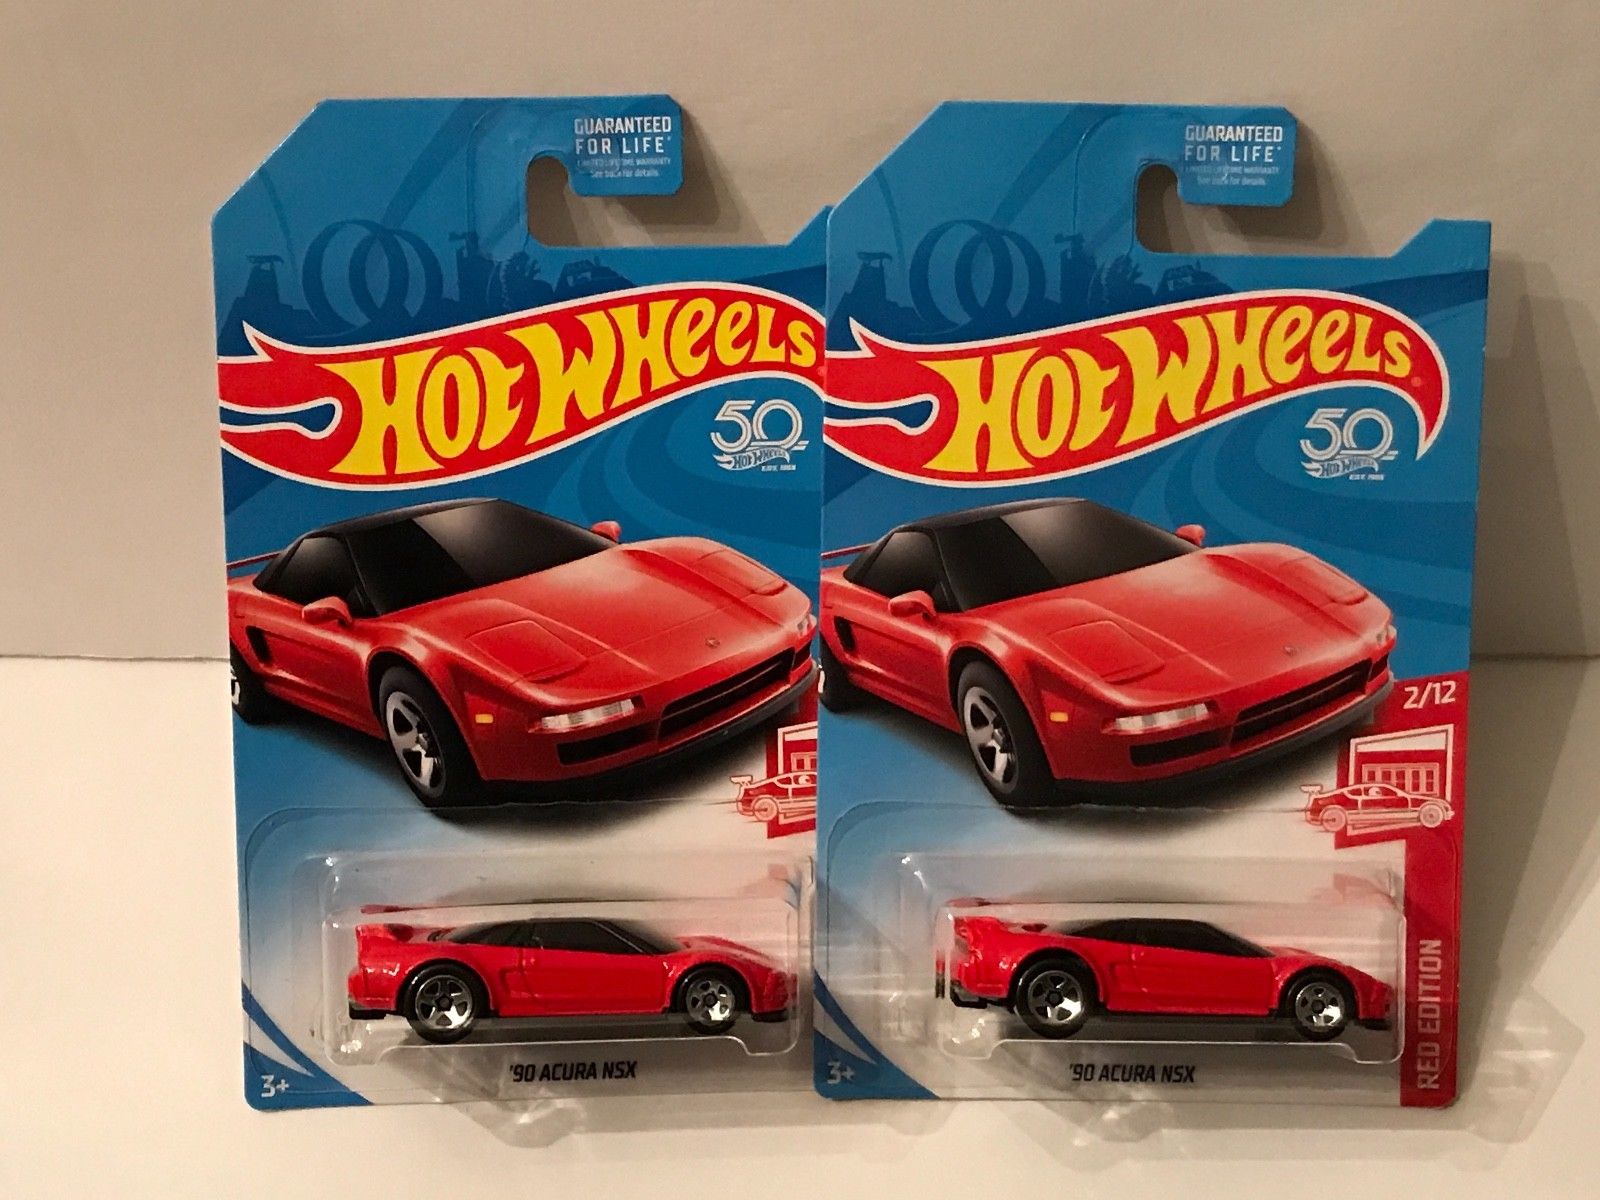 hot wheels 2019 red edition